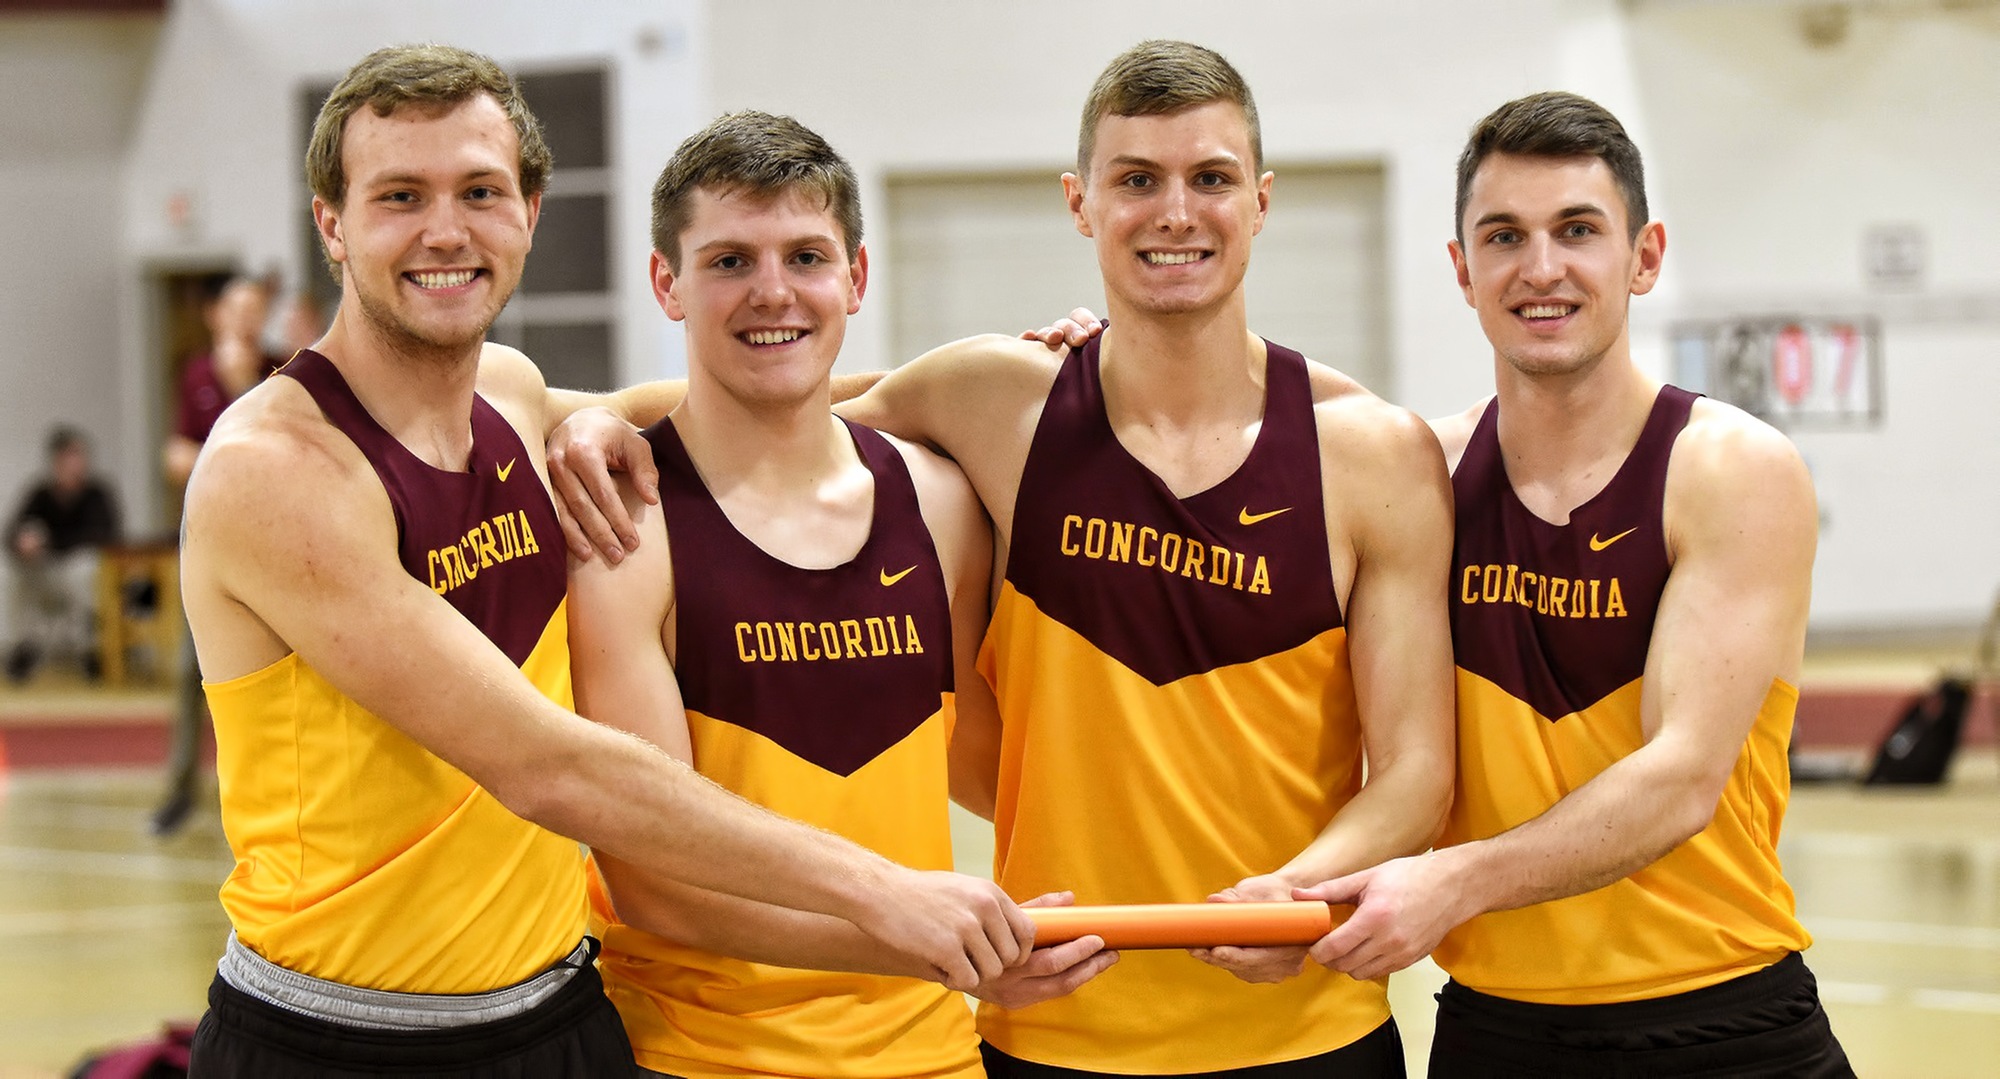 The 4x200-meter relay team of Colin Schuller, Hayden Gagnon, Cal Wright and Tom Whiting broke the school record by running a 1:31.18 at the Cobber Open.